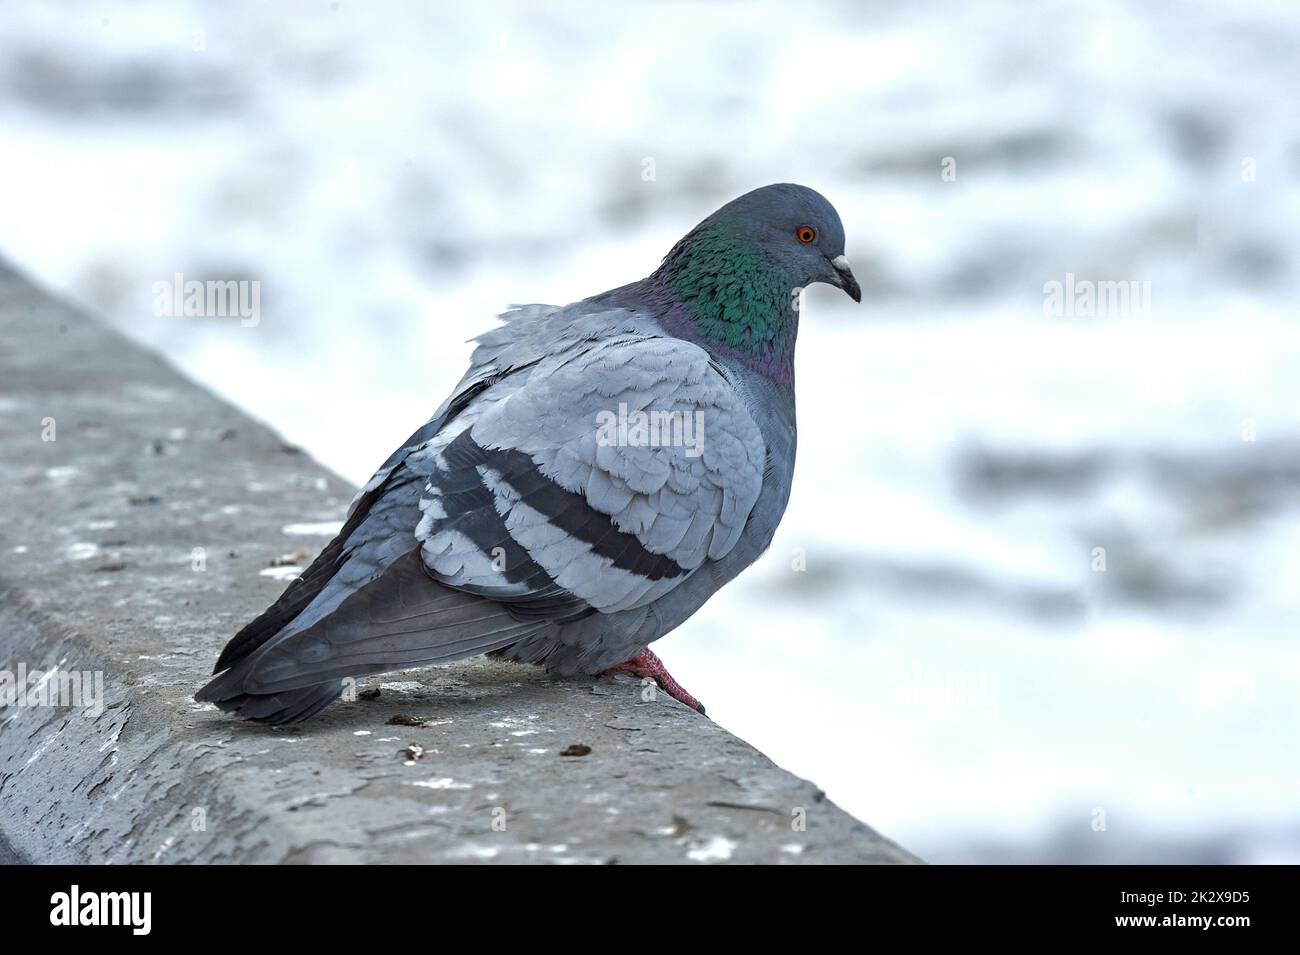 Pigeon on a stone on a blurry background Stock Photo